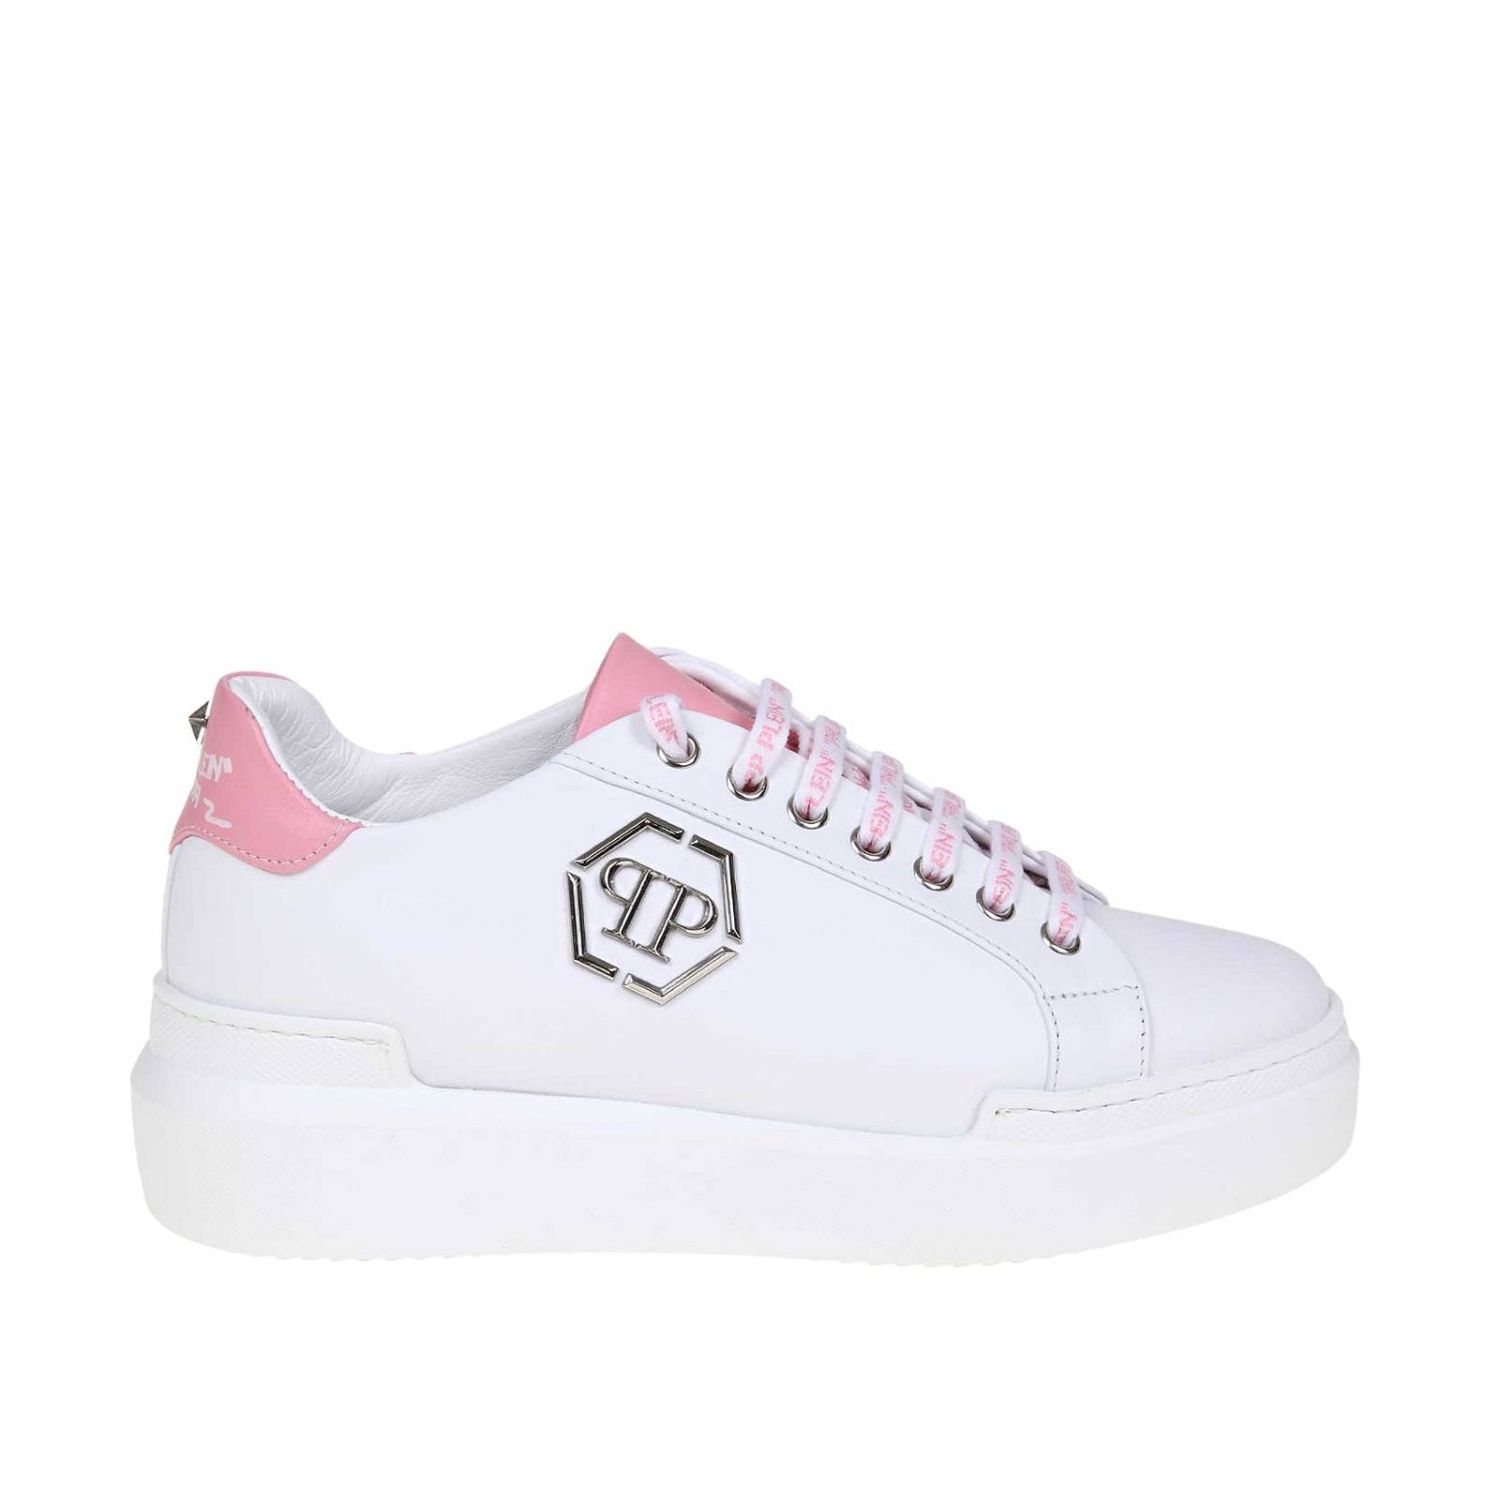 Philipp Outlet: sneakers woman - White 1 | Philipp Plein sneakers WSC1201 PLE025N online on GIGLIO.COM